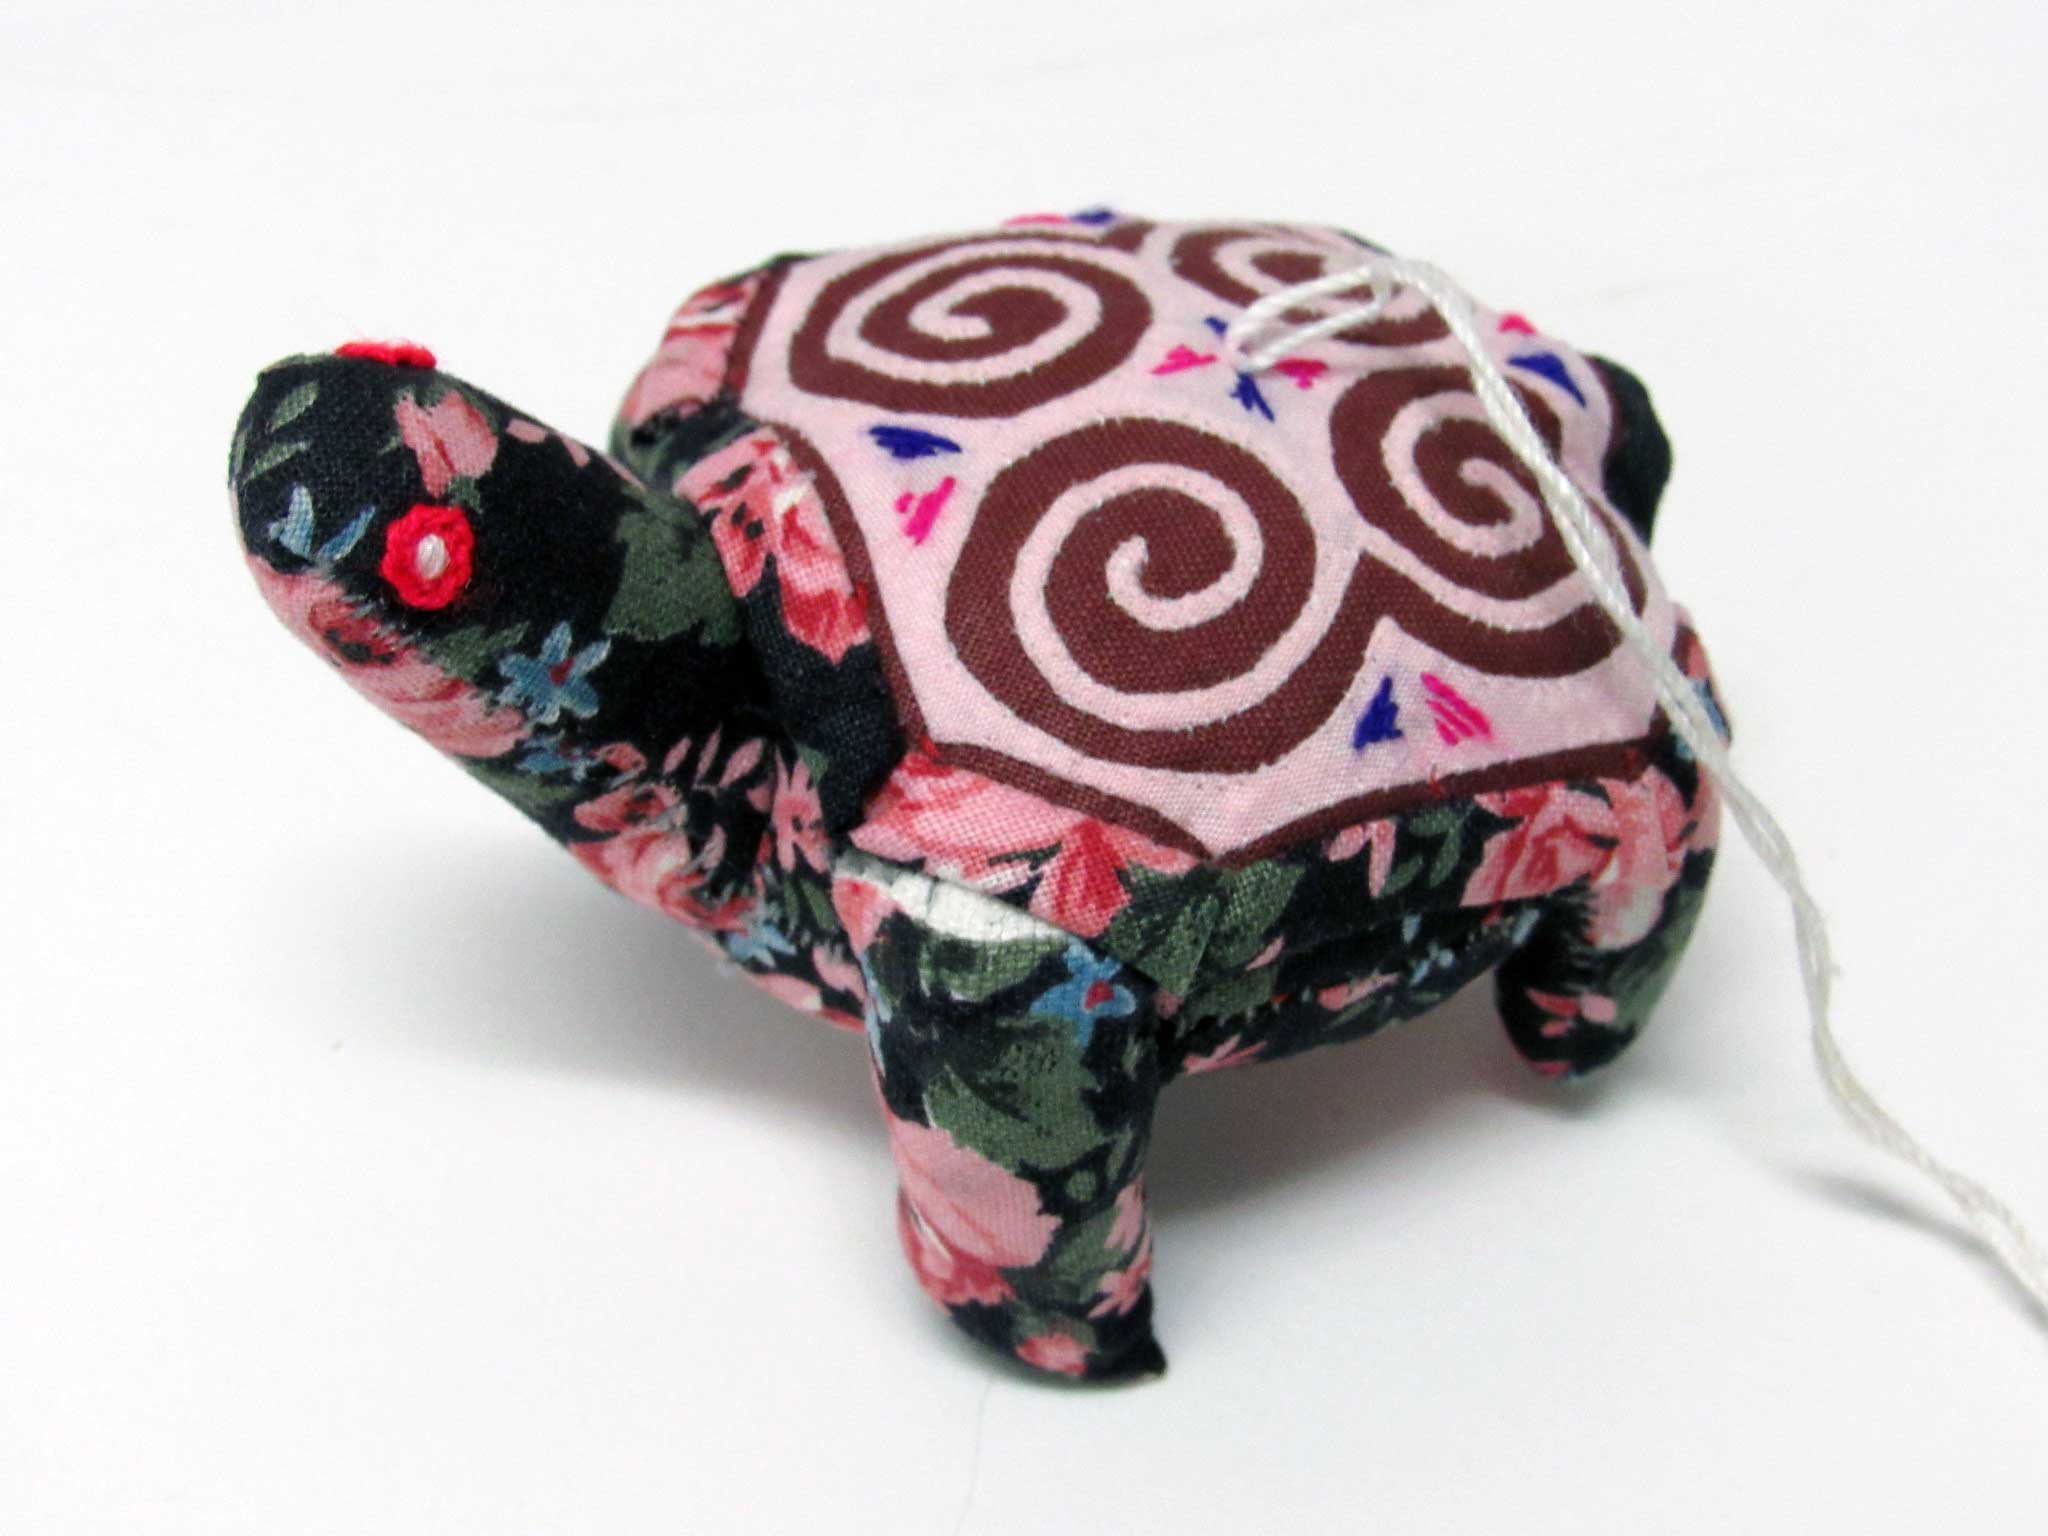 Turtle ornament made by Made by Lee Vang, 1993